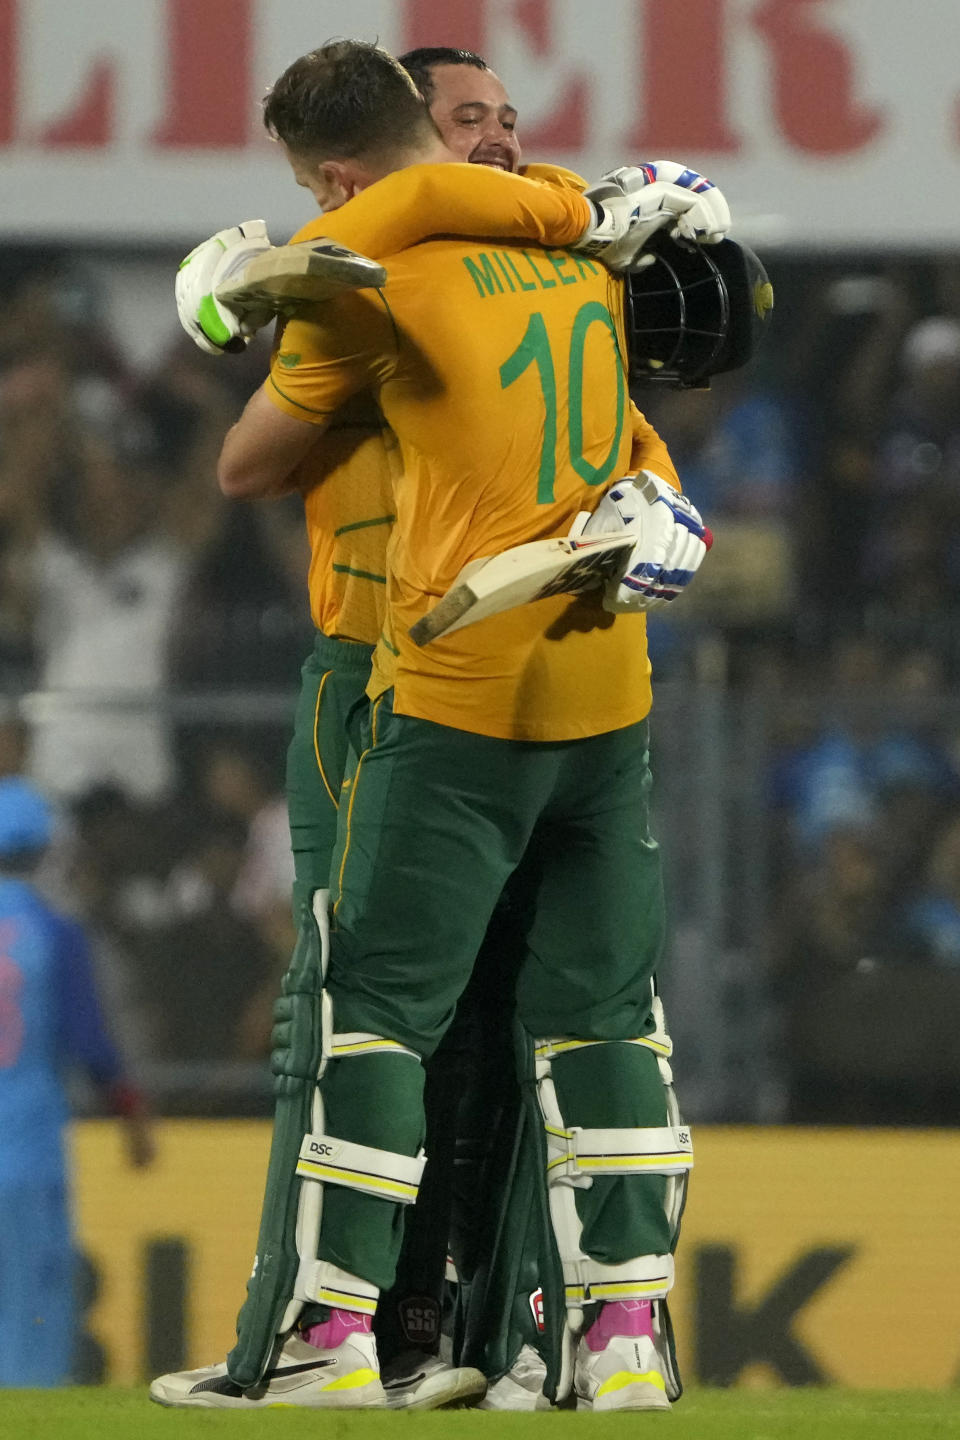 South Africa's David Miller, right, celebrates with batting partner Quinton de Kock after scoring a century during the second T20 cricket match between India and South Africa, in Guwahati, India, Sunday, Oct. 2, 2022. (AP Photo/Anupam Nath)